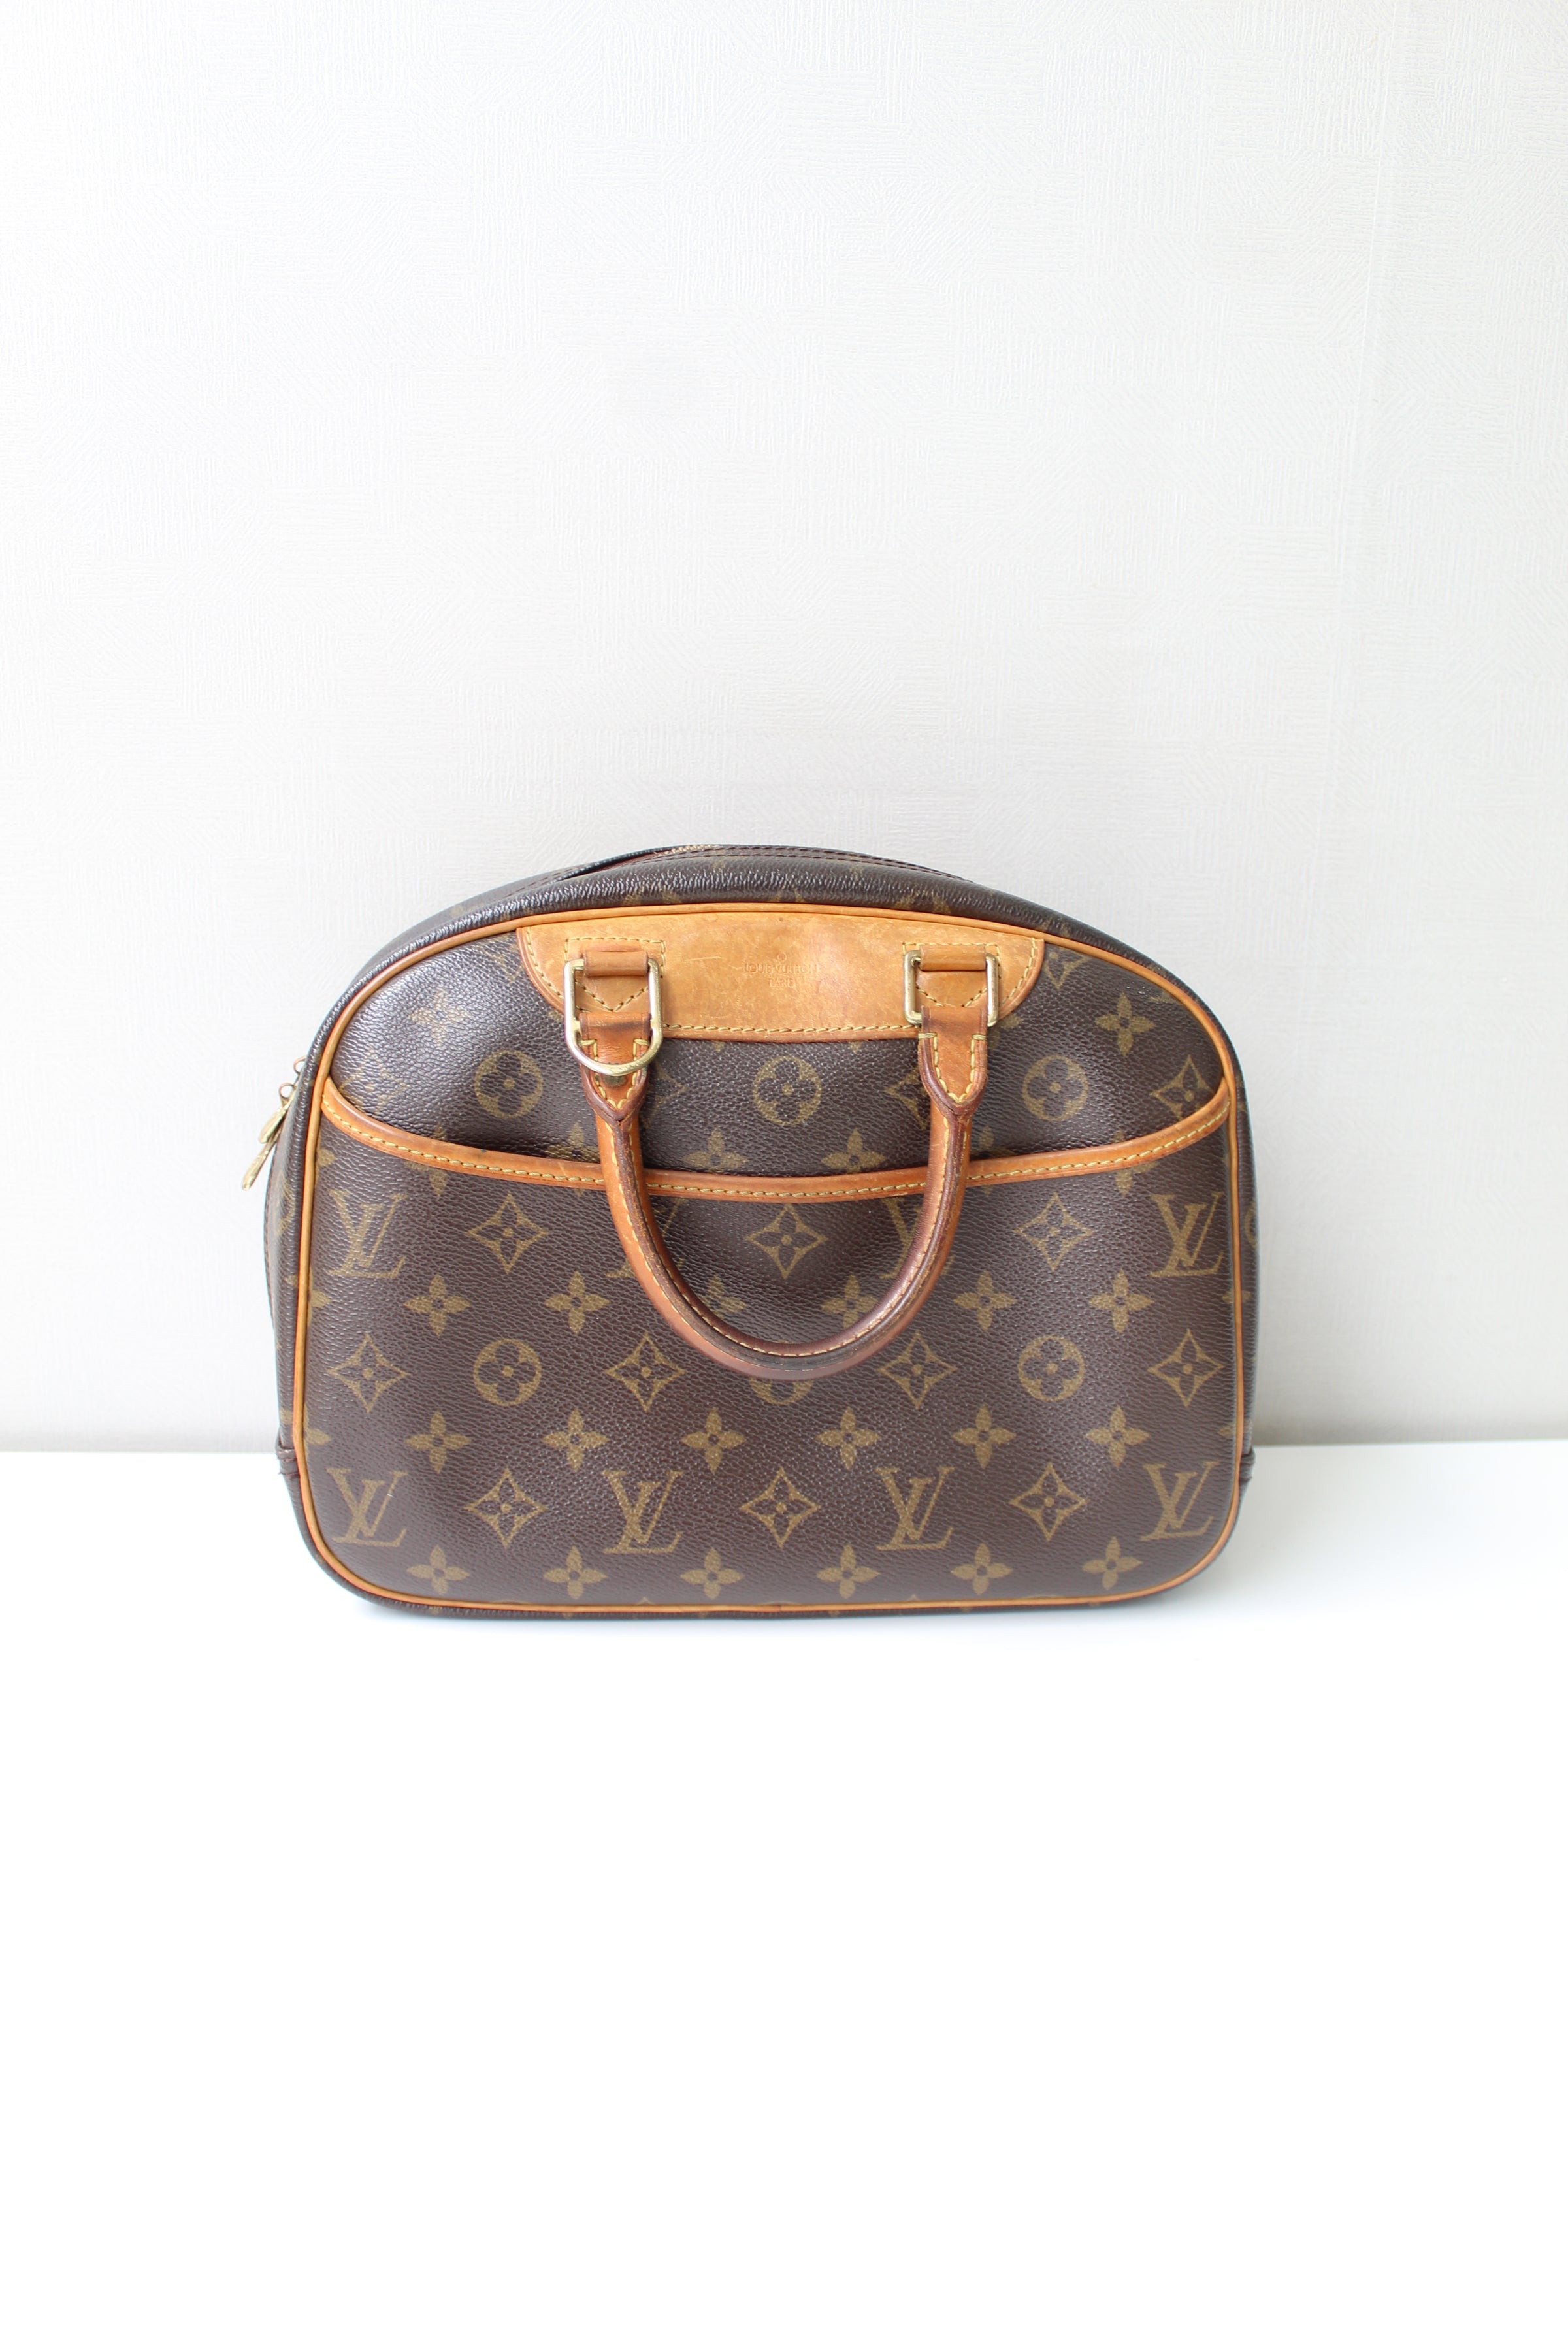 Dee.Gadgets - LV Trouville Size MM Japan Preloved High